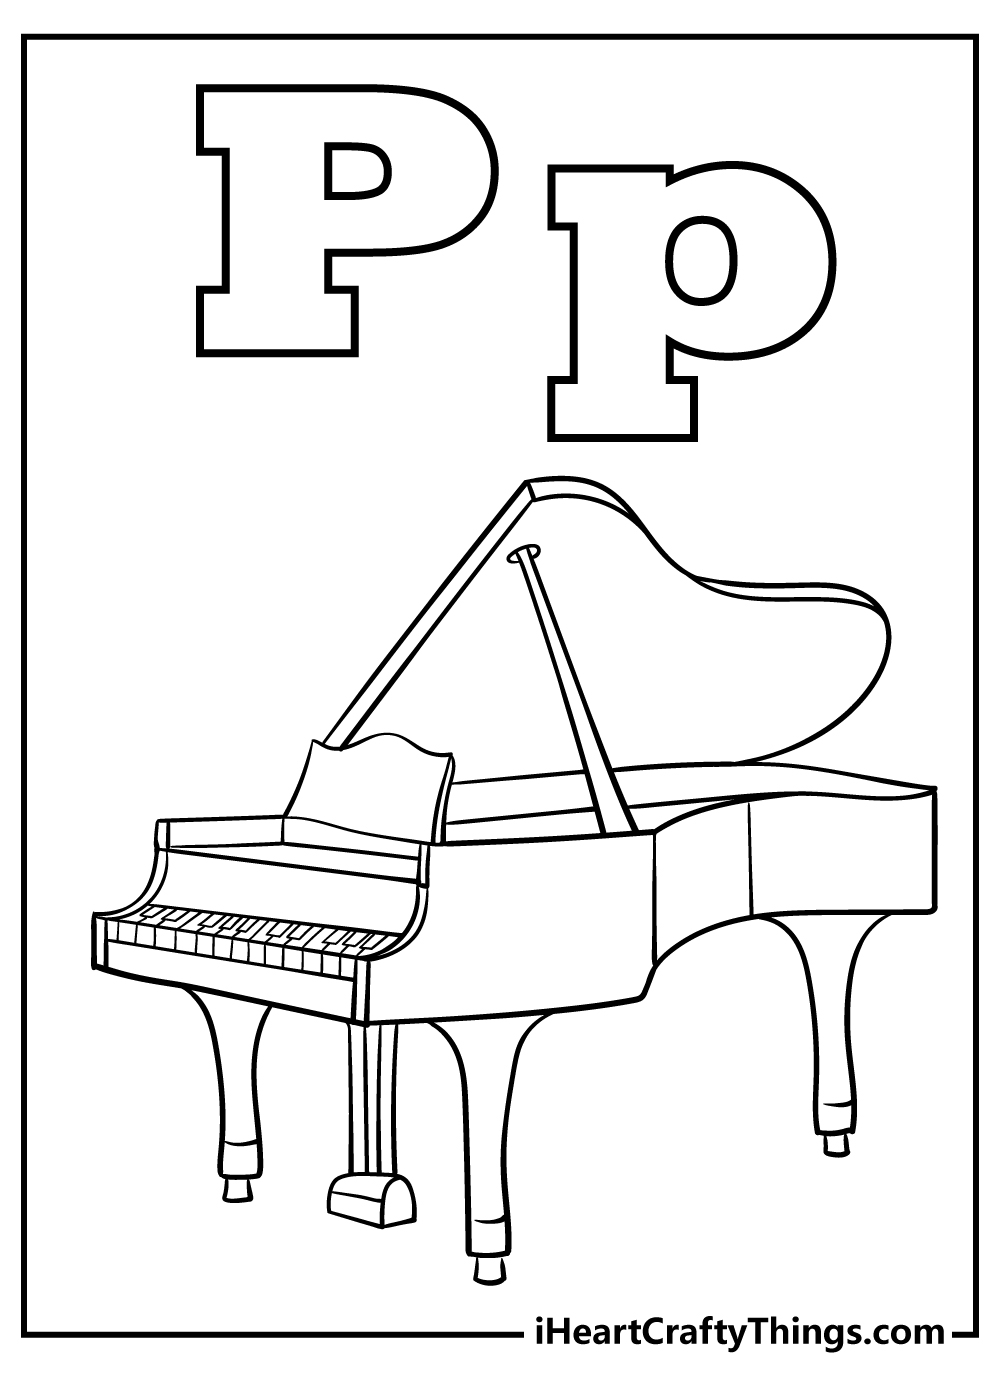 Letter P Coloring Book for kids free printable